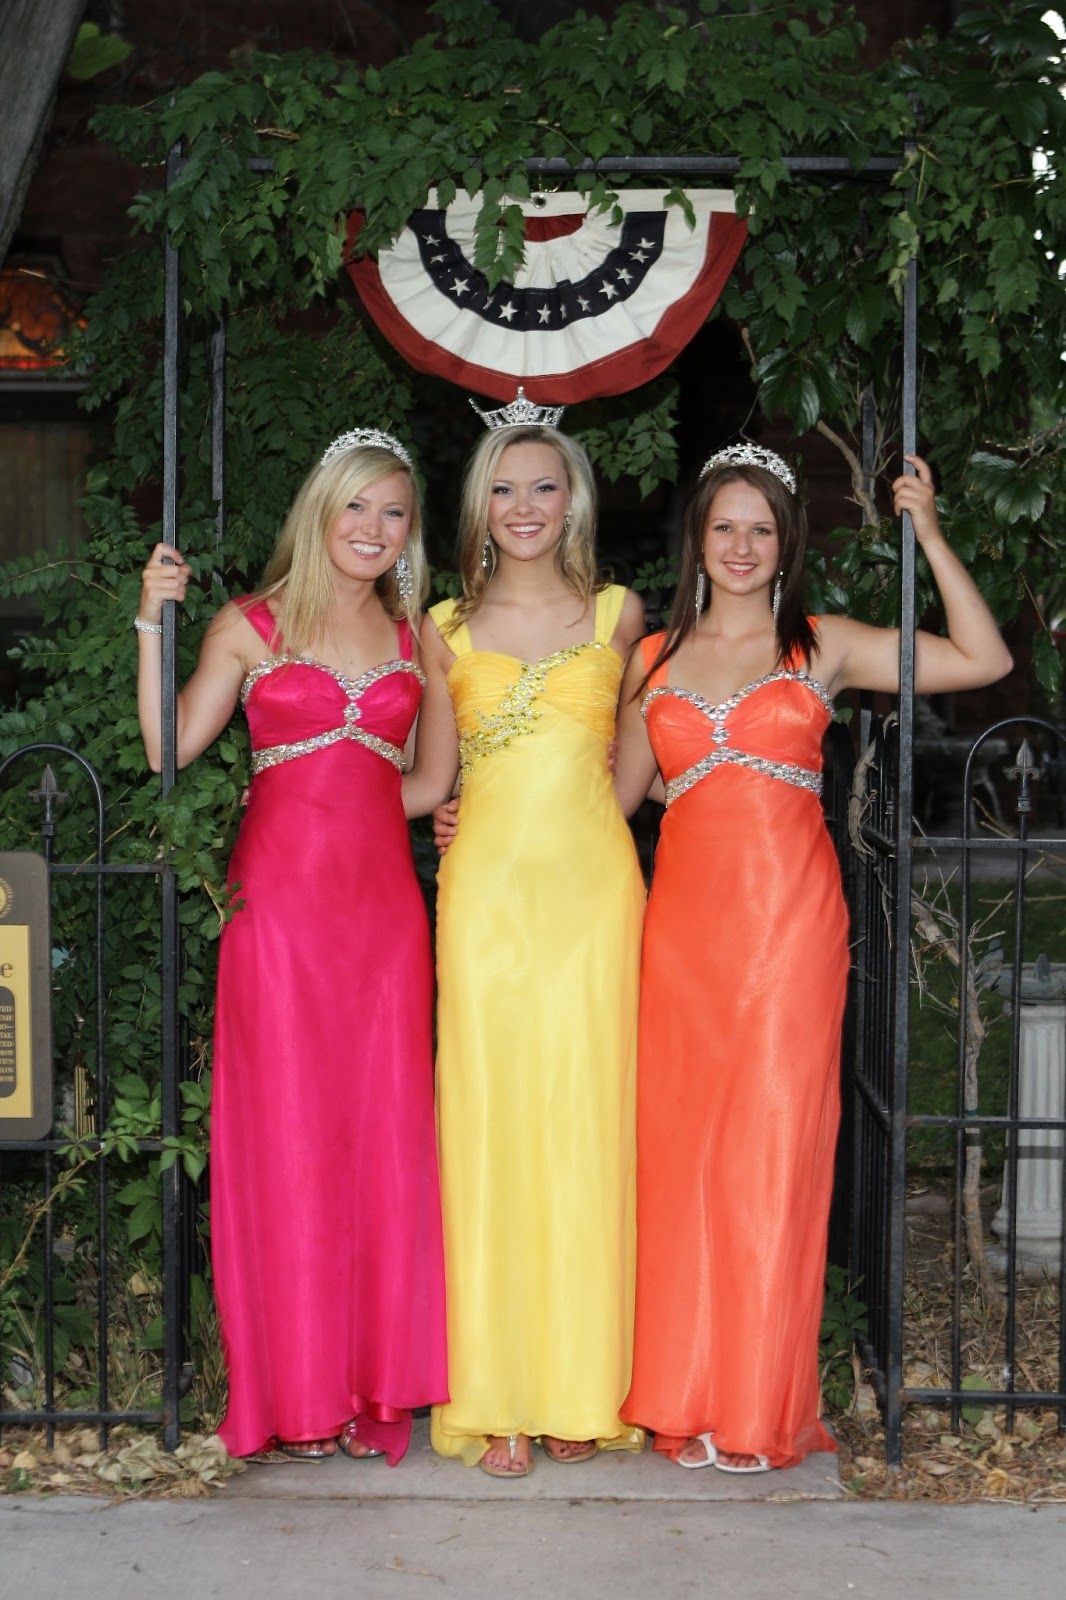 The Payson Chronicle: Miss Payson Pageant This Saturday